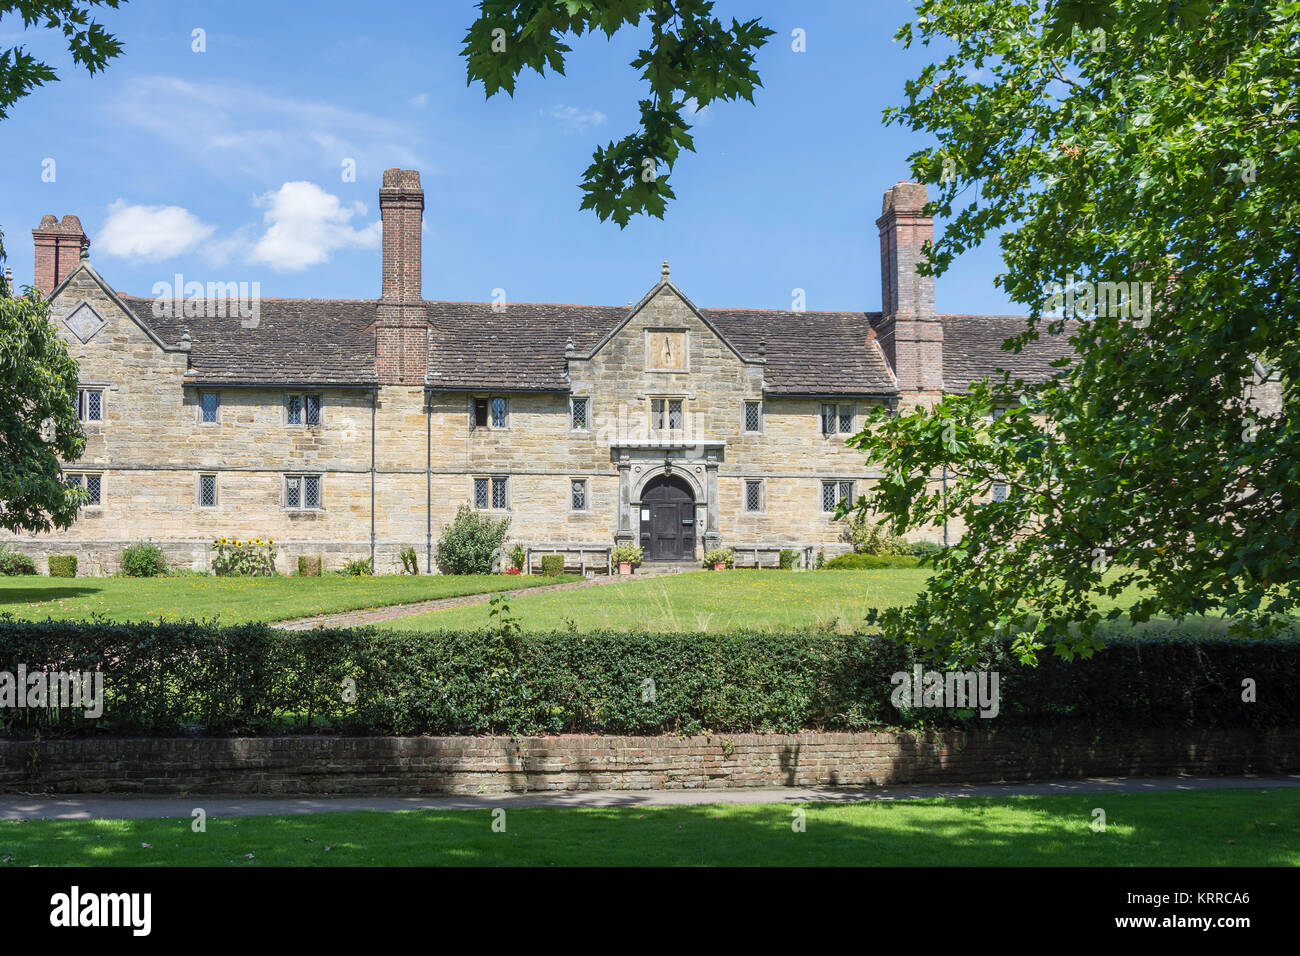 17th century Sackville College almshouse, High Street, East Grinstead, West Sussex, England, United Kingdom Stock Photo